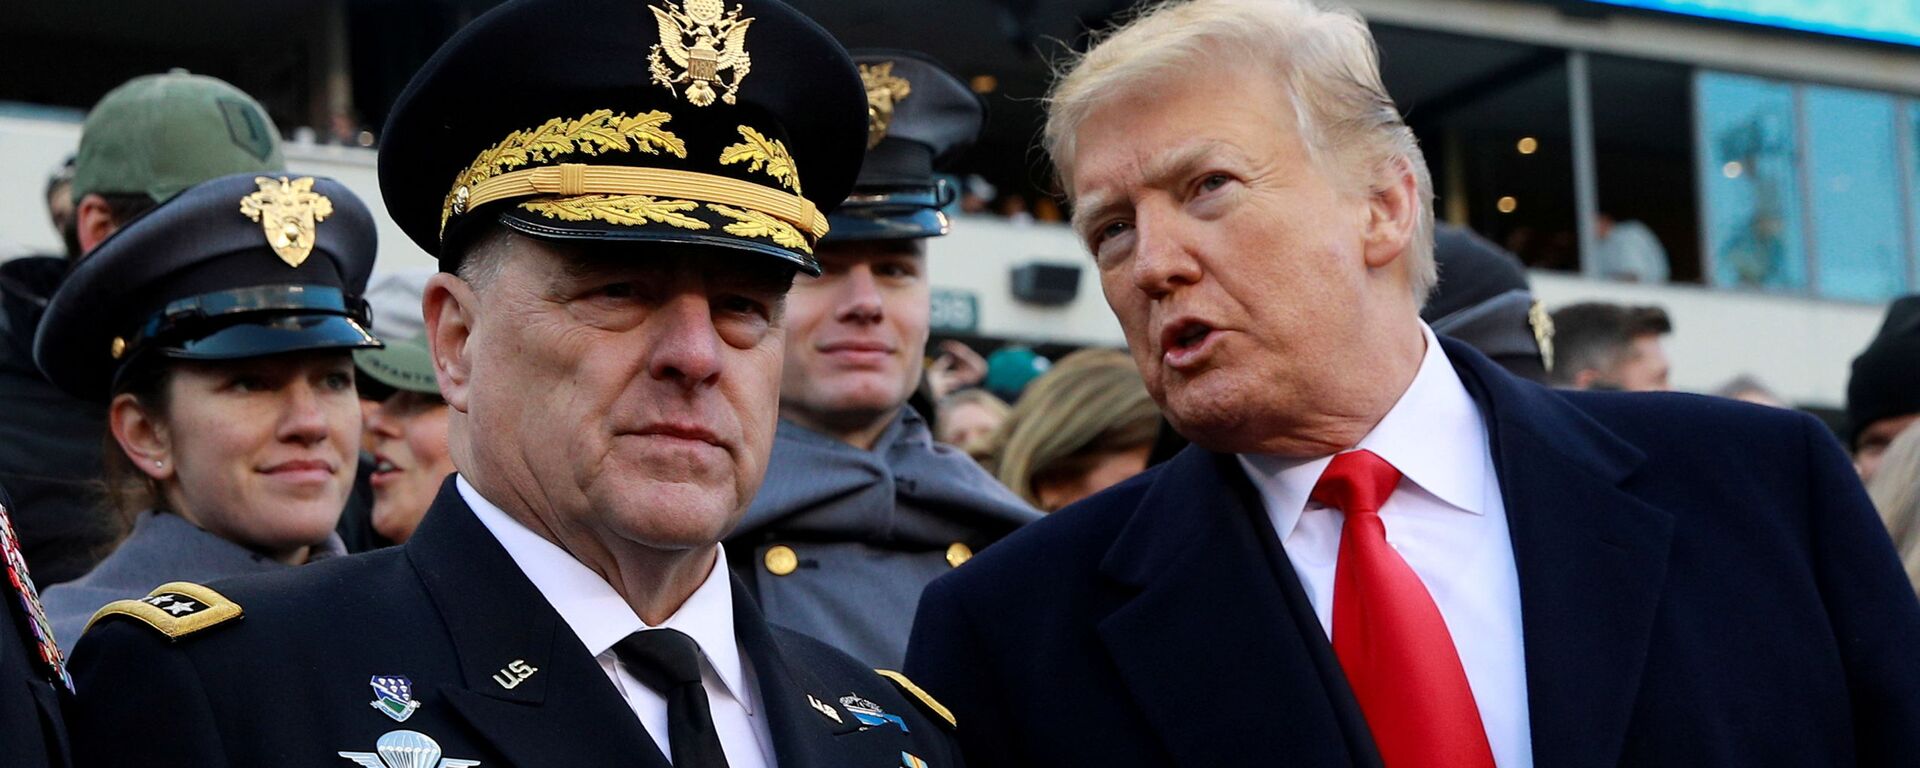  U.S. President Donald Trump and Gen. Mark Milley, Chief of Staff of the United States Army, speak at the 119th Army-Navy football game at Lincoln Financial Field in Philadelphia, Pennsylvania, U.S. December 8, 2018 - Sputnik International, 1920, 15.09.2021